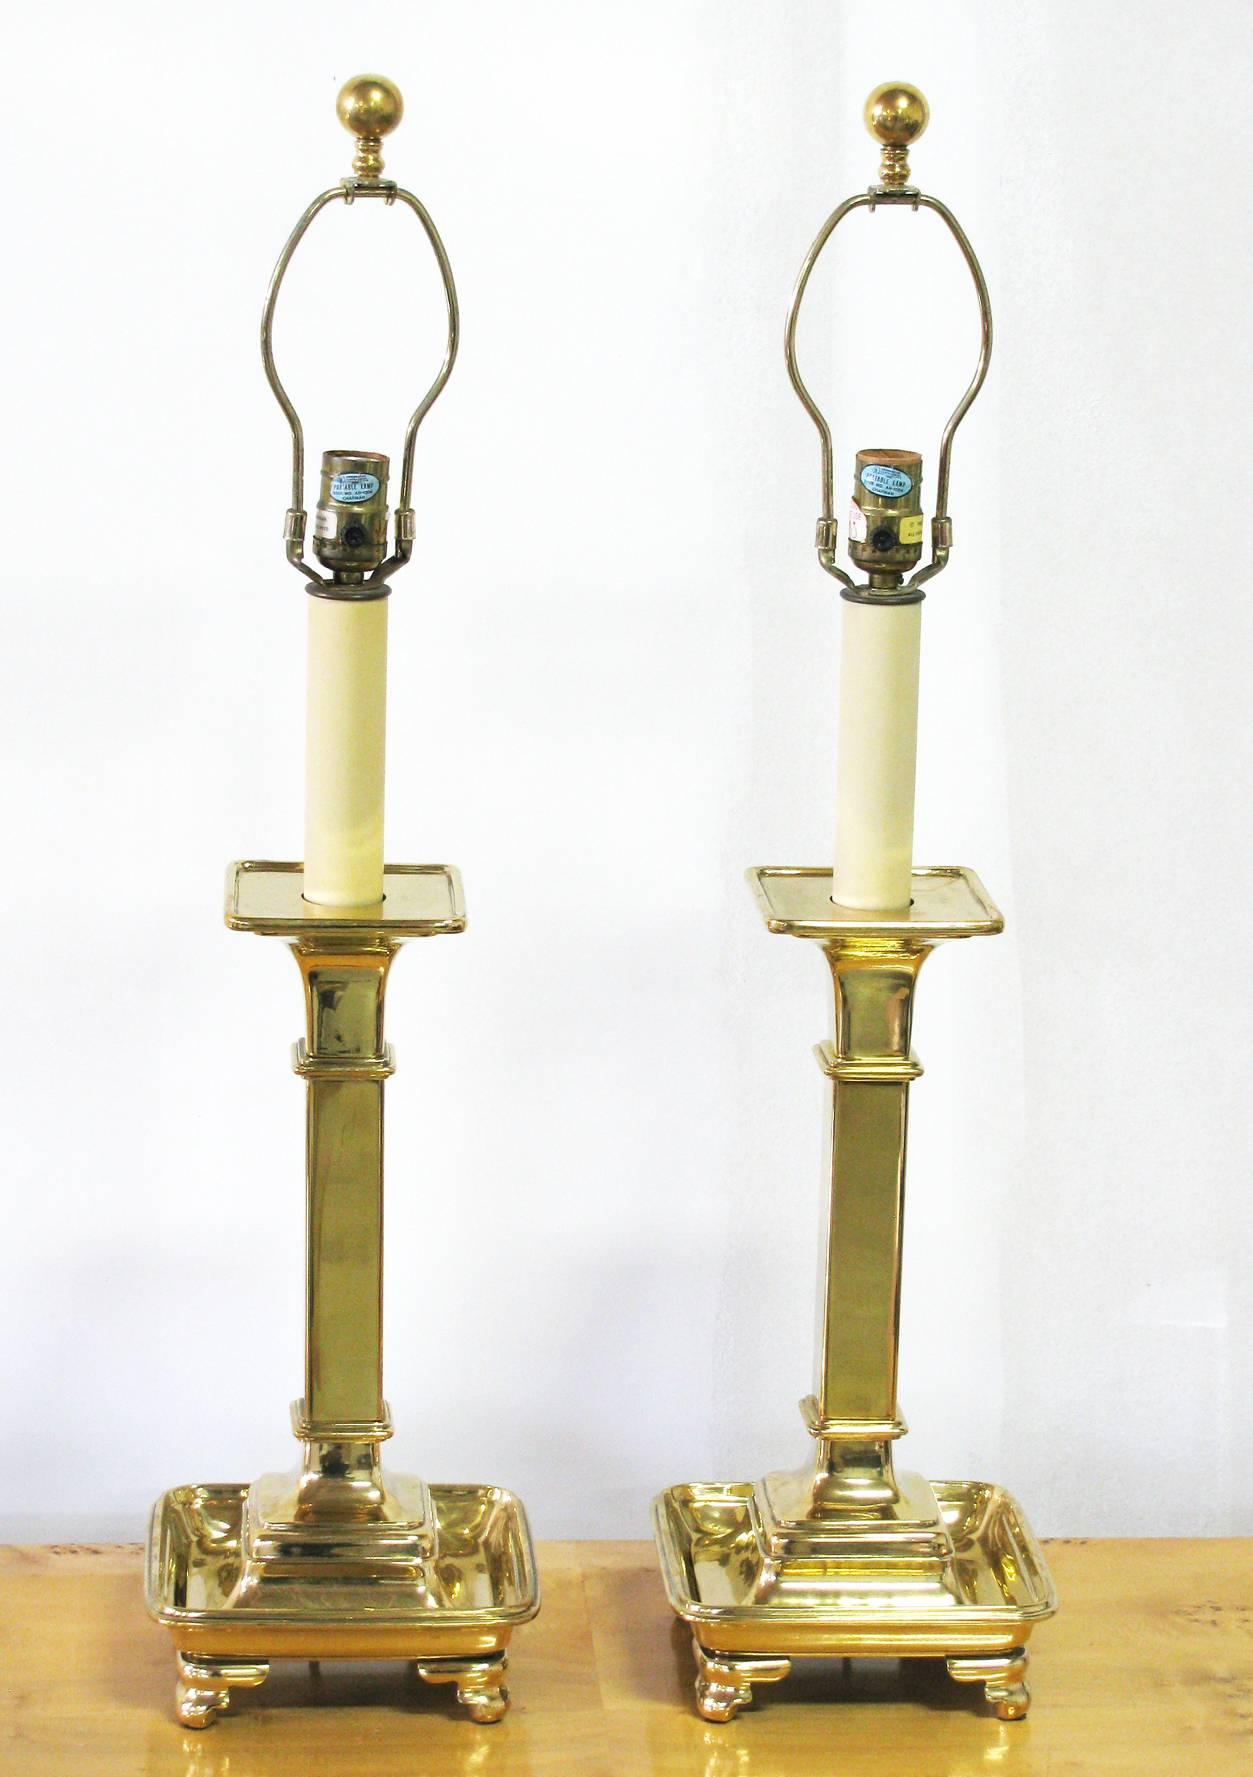 A classical style pair of quality table lamps of solid brass by Chapman. The lamps are substantial and heavy, polished brass and feature a single (three-way) socket and brass ball finial. Shades are not included.